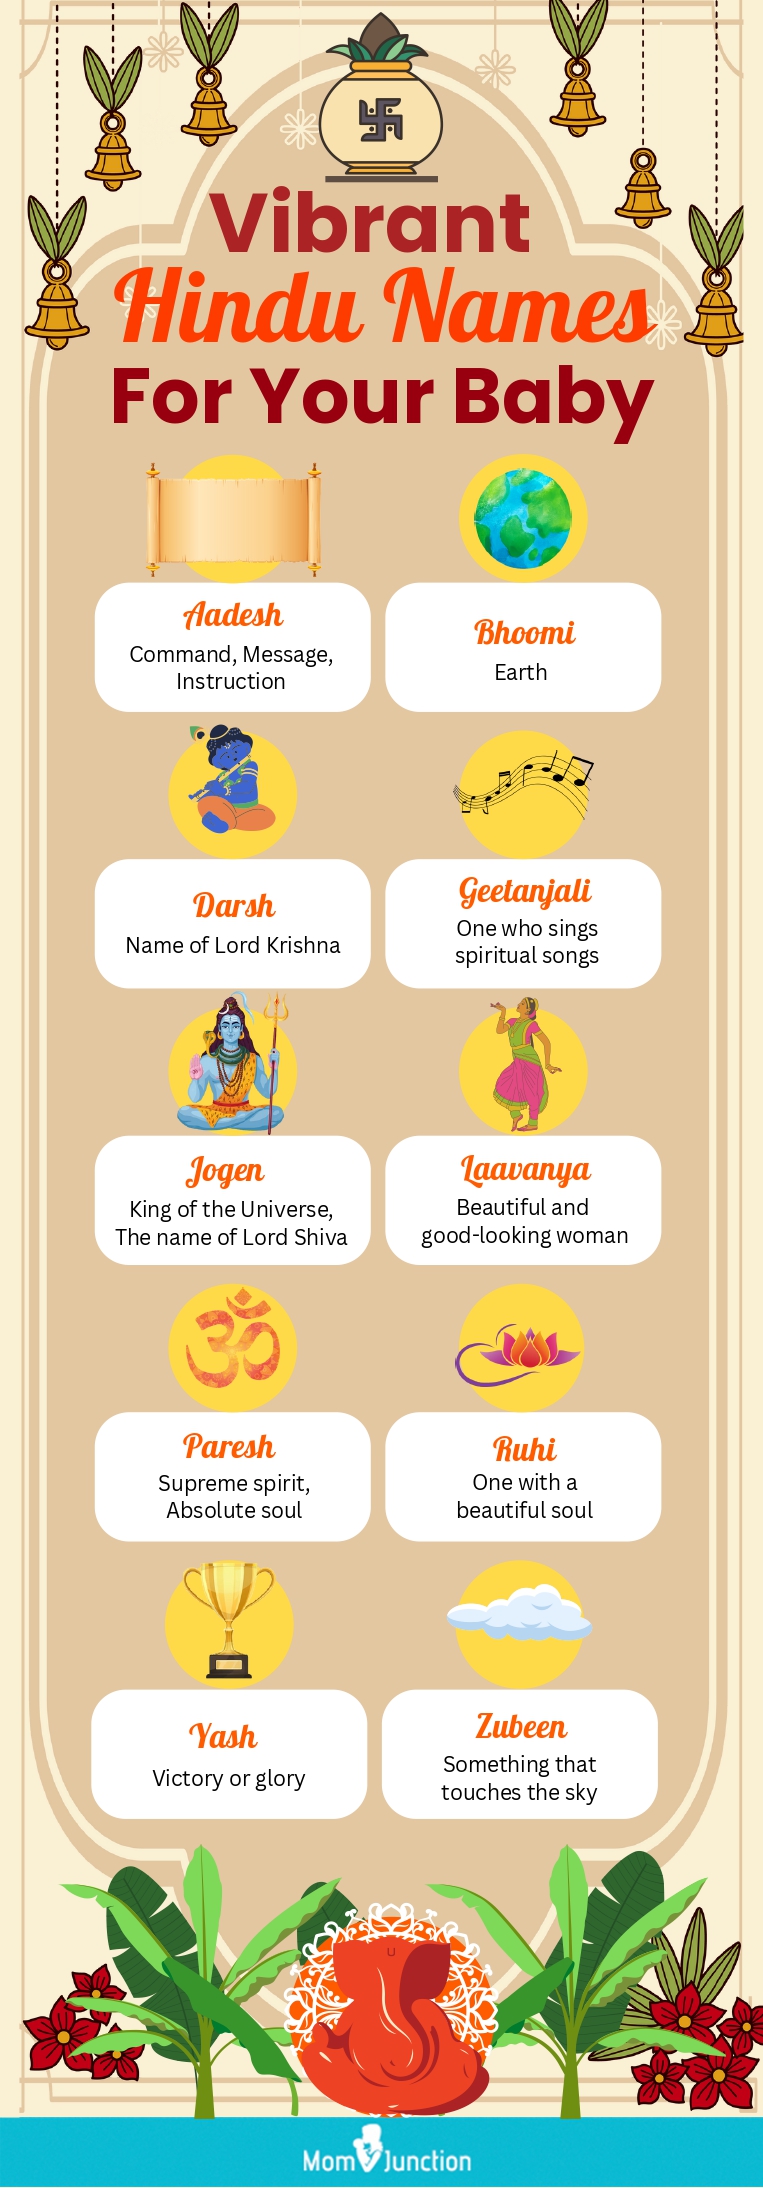 vibrant hindu names for your baby (infographic)